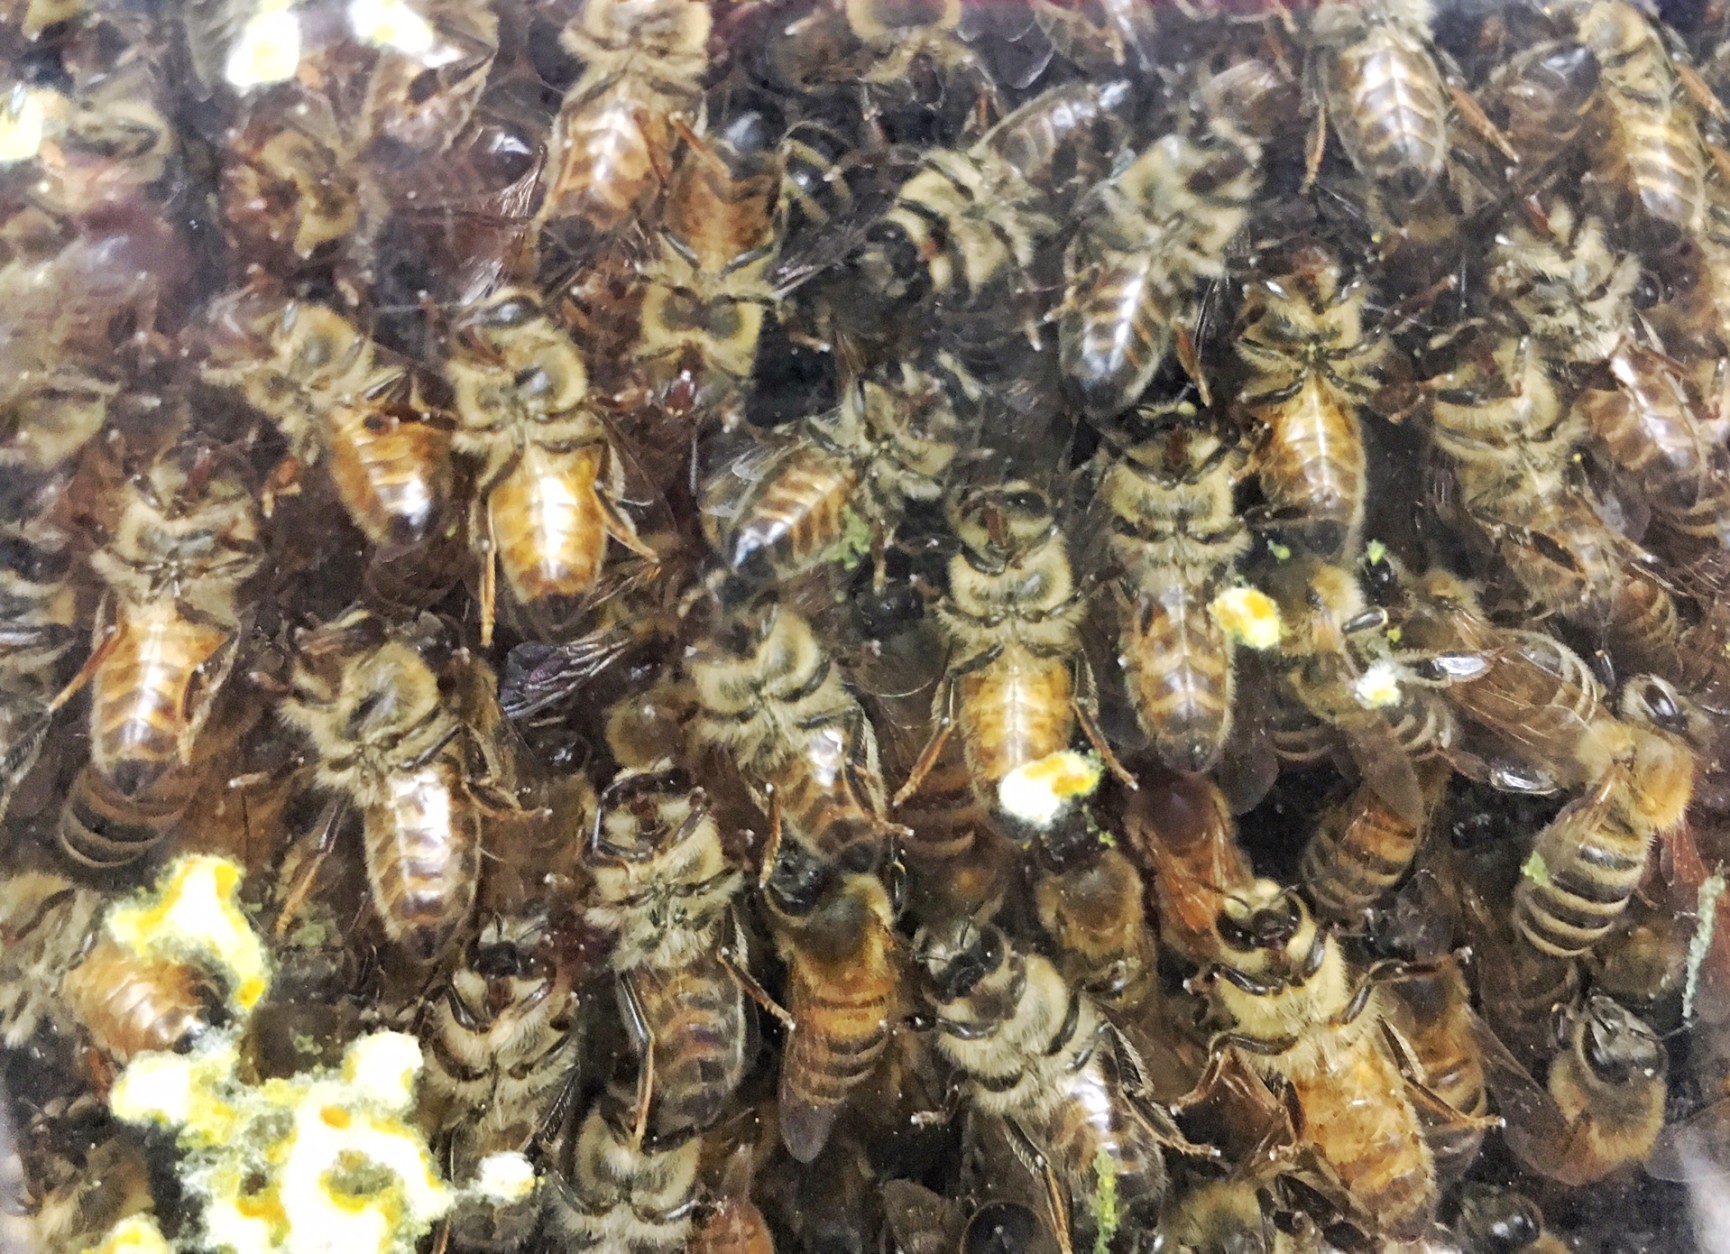 Mac's job is to inspect and certify every beehive in the state. They respond to calls from beekeepers -- professionals and hobbyists alike -- who have run into problems and worry about something called American foulbrood disease. (WTOP/Kate Ryan)